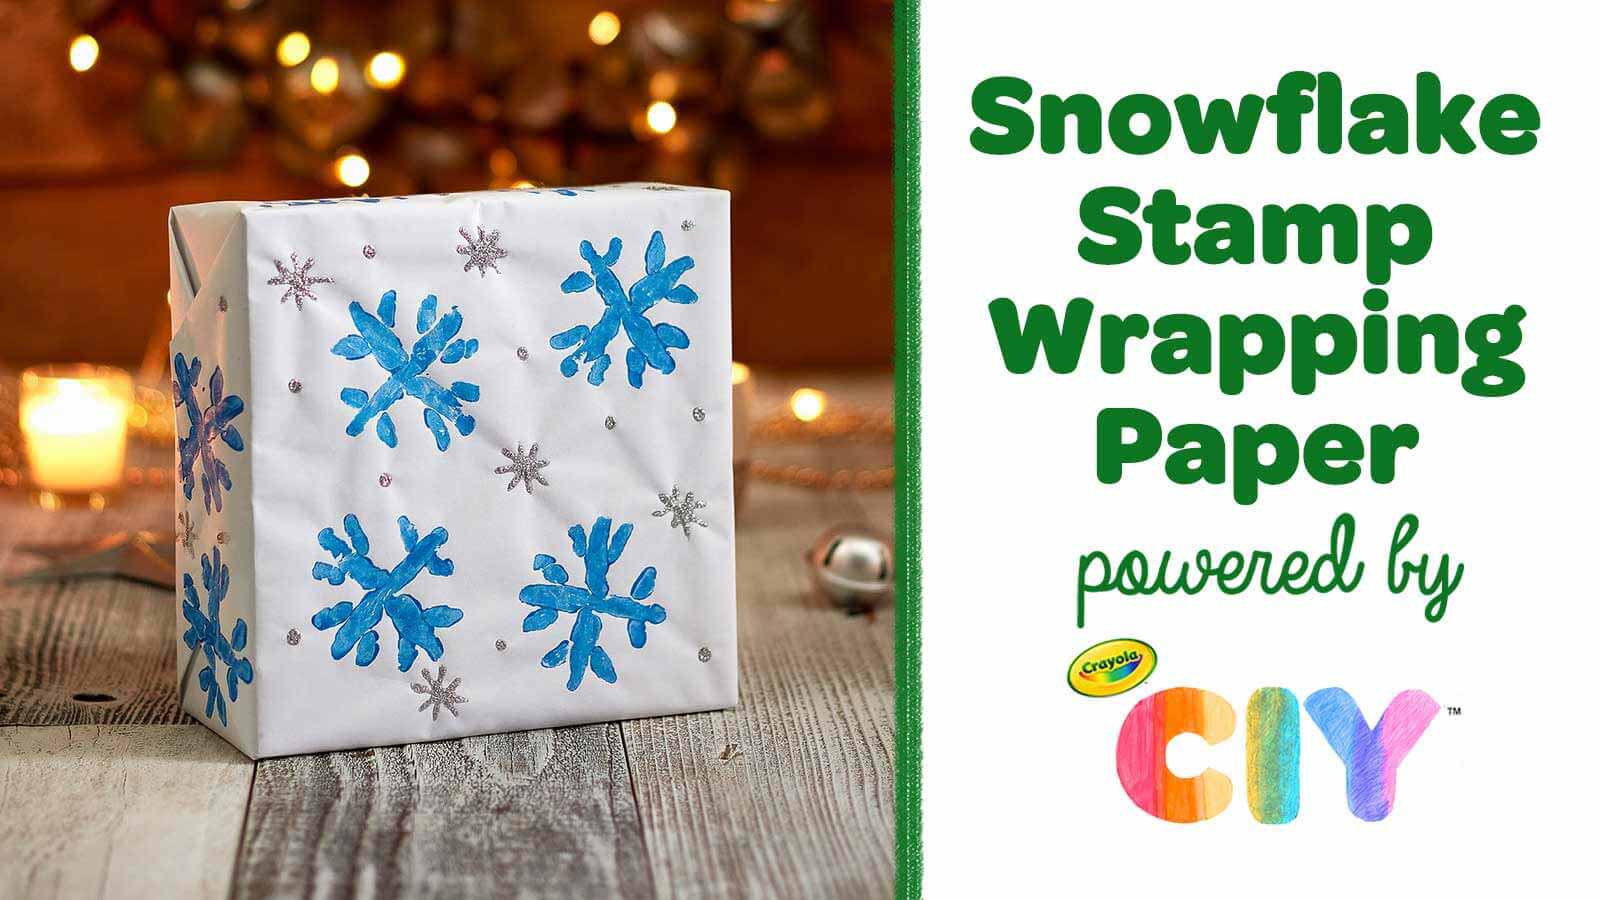 Sky blue (Crayola) - solid color Wrapping Paper by Make it